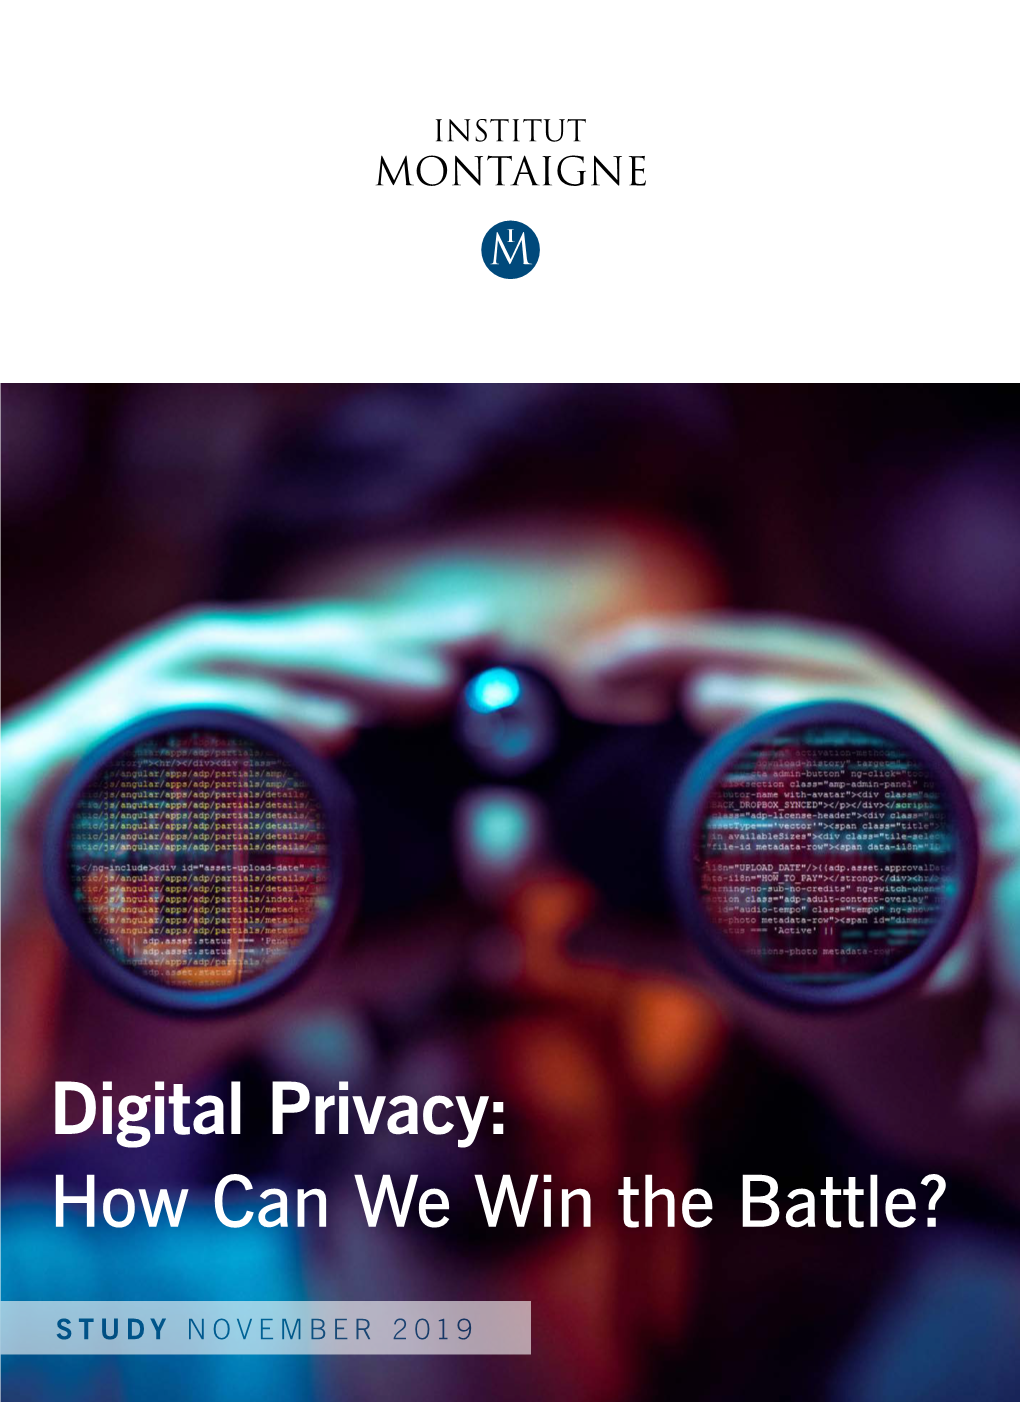 Digital Privacy: How Can We Win the Battle?